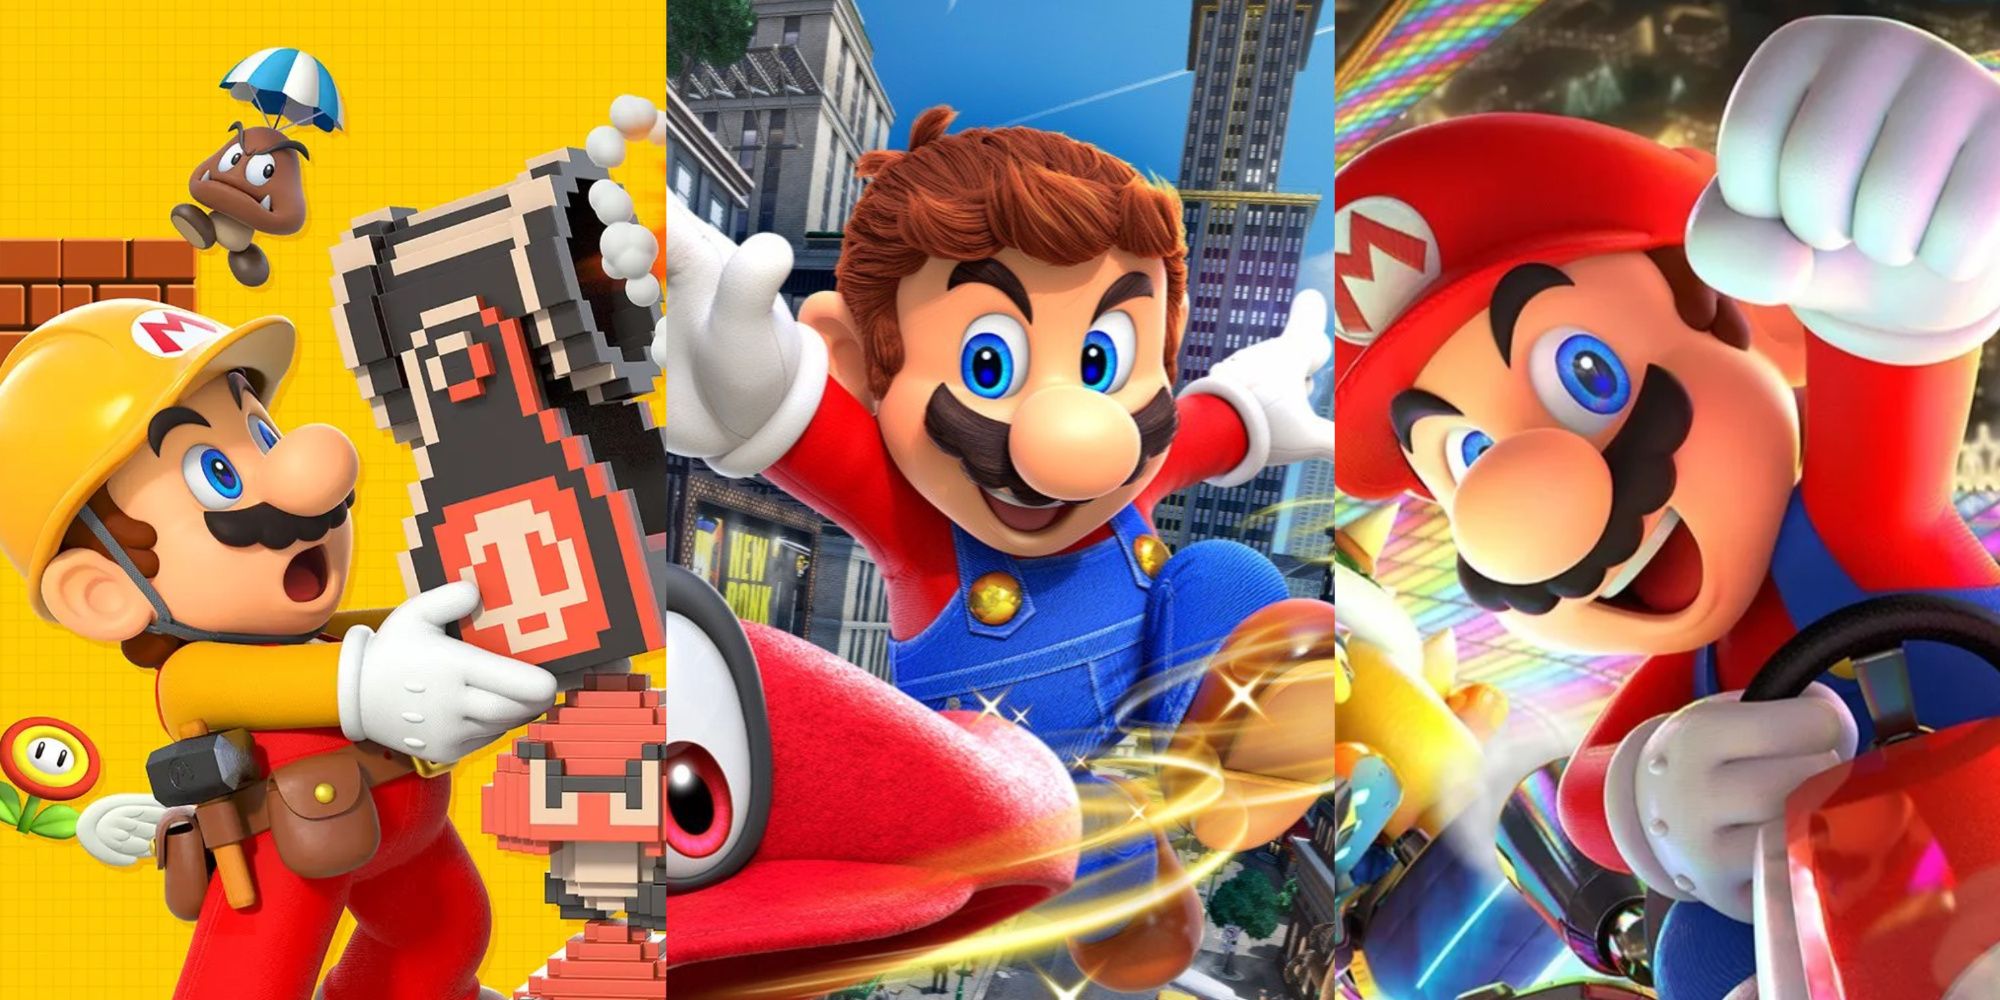 A collage with promotional art of Super Mario Maker 2, Super Mario Oddysey, and Mario Kart 8.